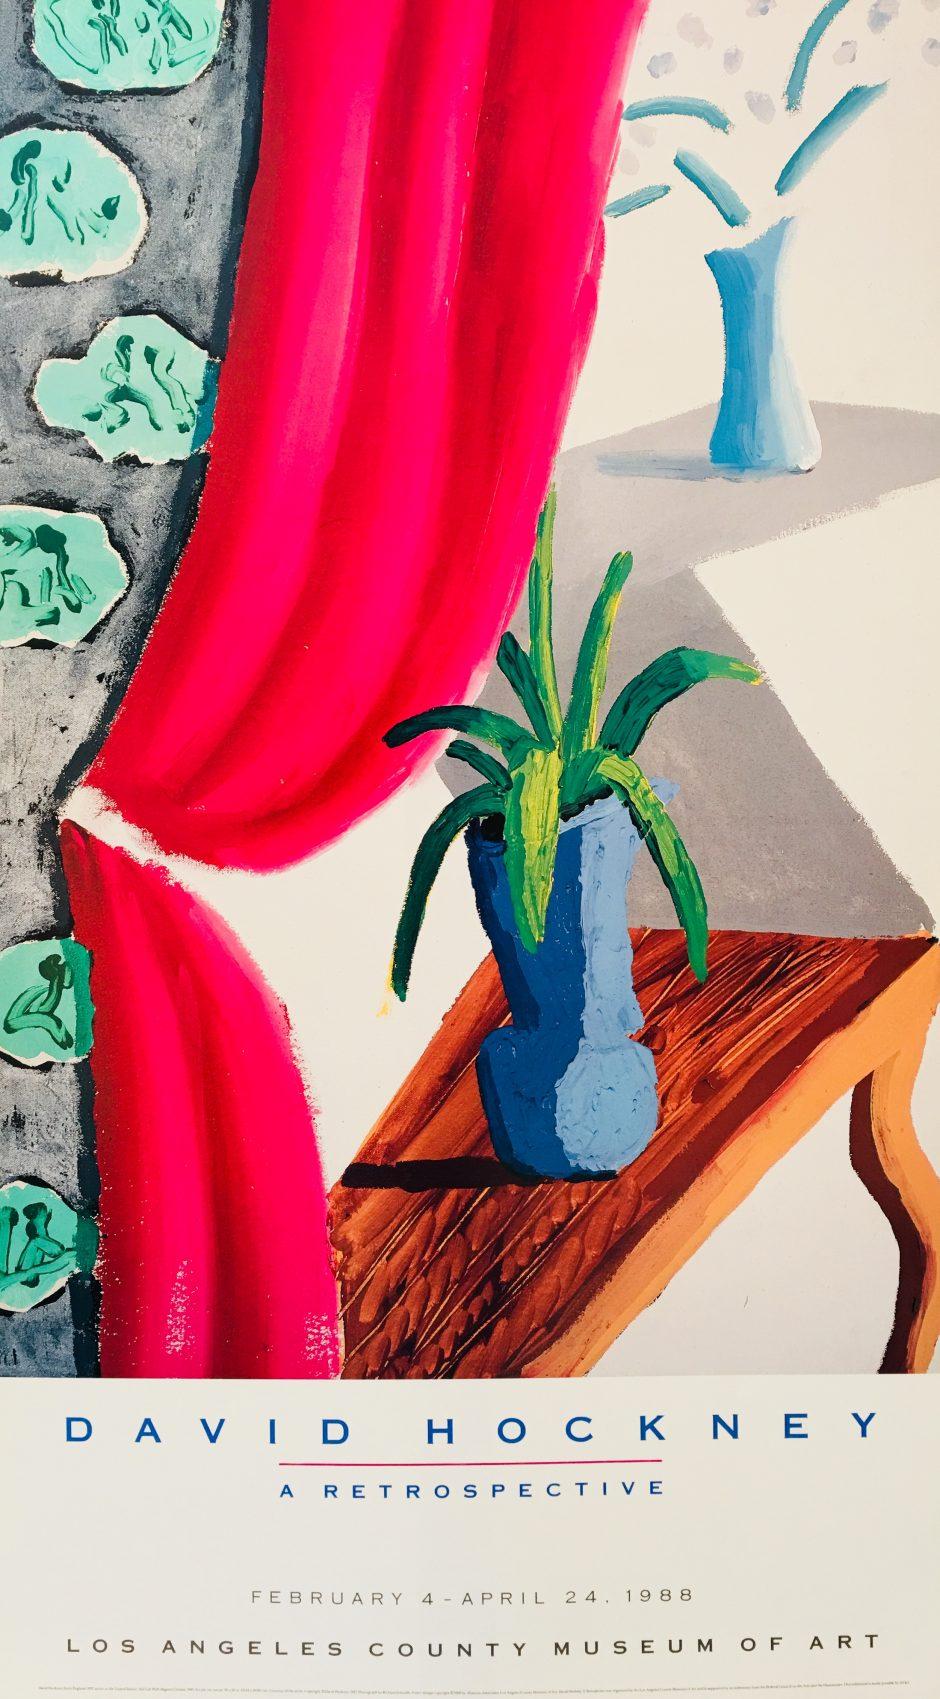 Original vintage art poster 'Still Life with Magenta Curtain' David Hockney 1988.

David Hockney is an important English artist, prevalent during the Pop movement of the 1960s, Hockney is considered one of the most influential artists of the 20th